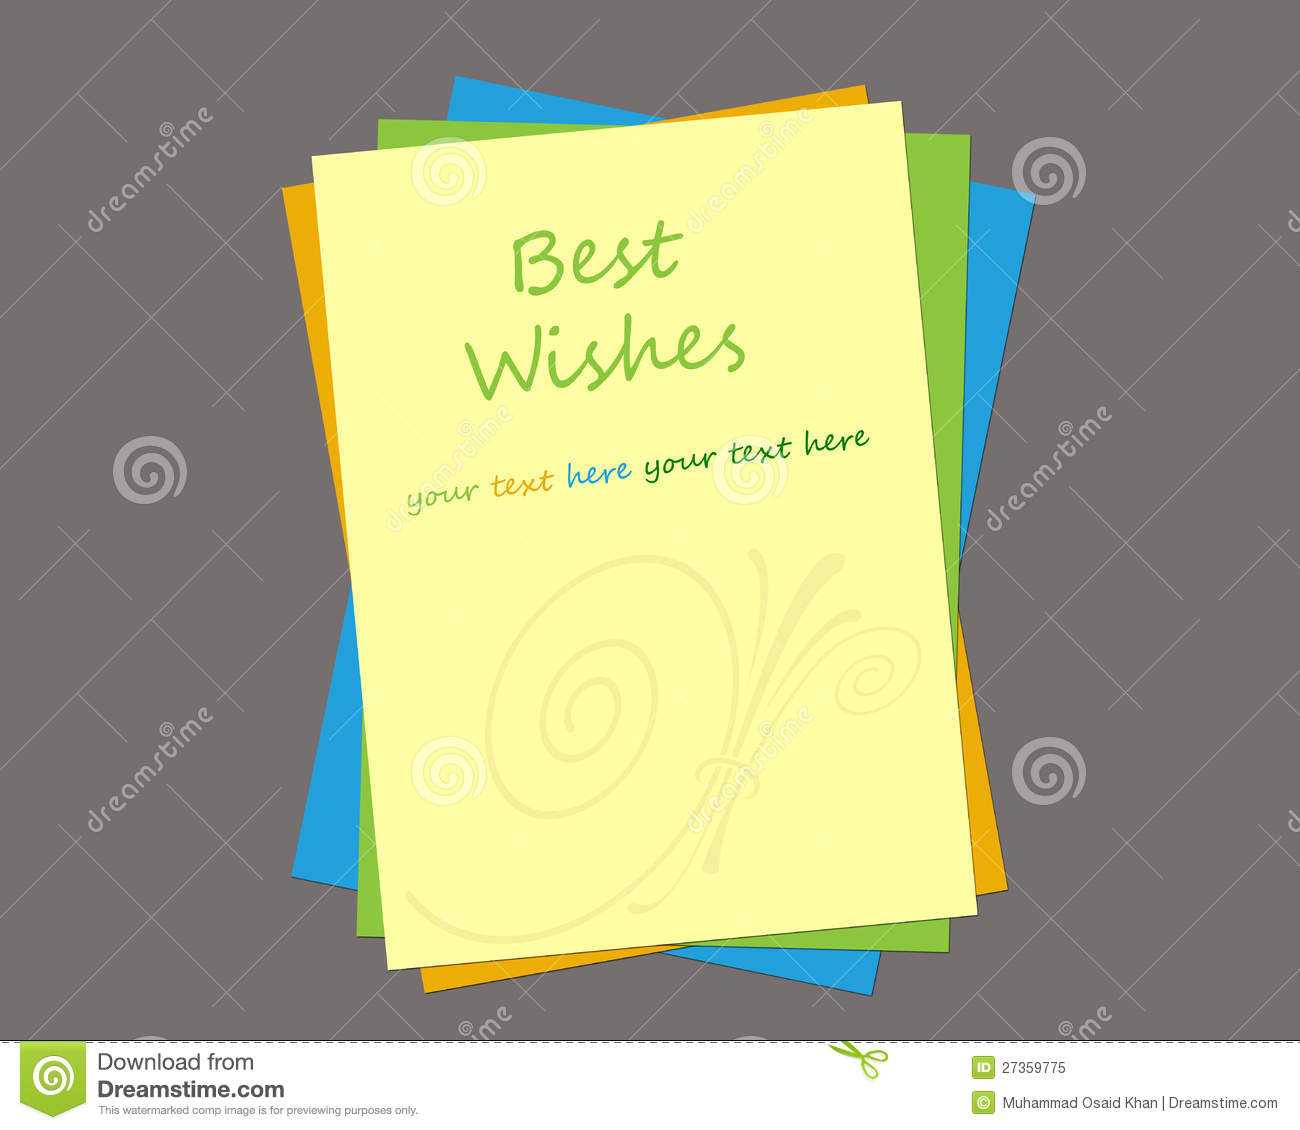 Greeting Card Template Stock Illustration. Illustration Of Regarding Free Blank Greeting Card Templates For Word